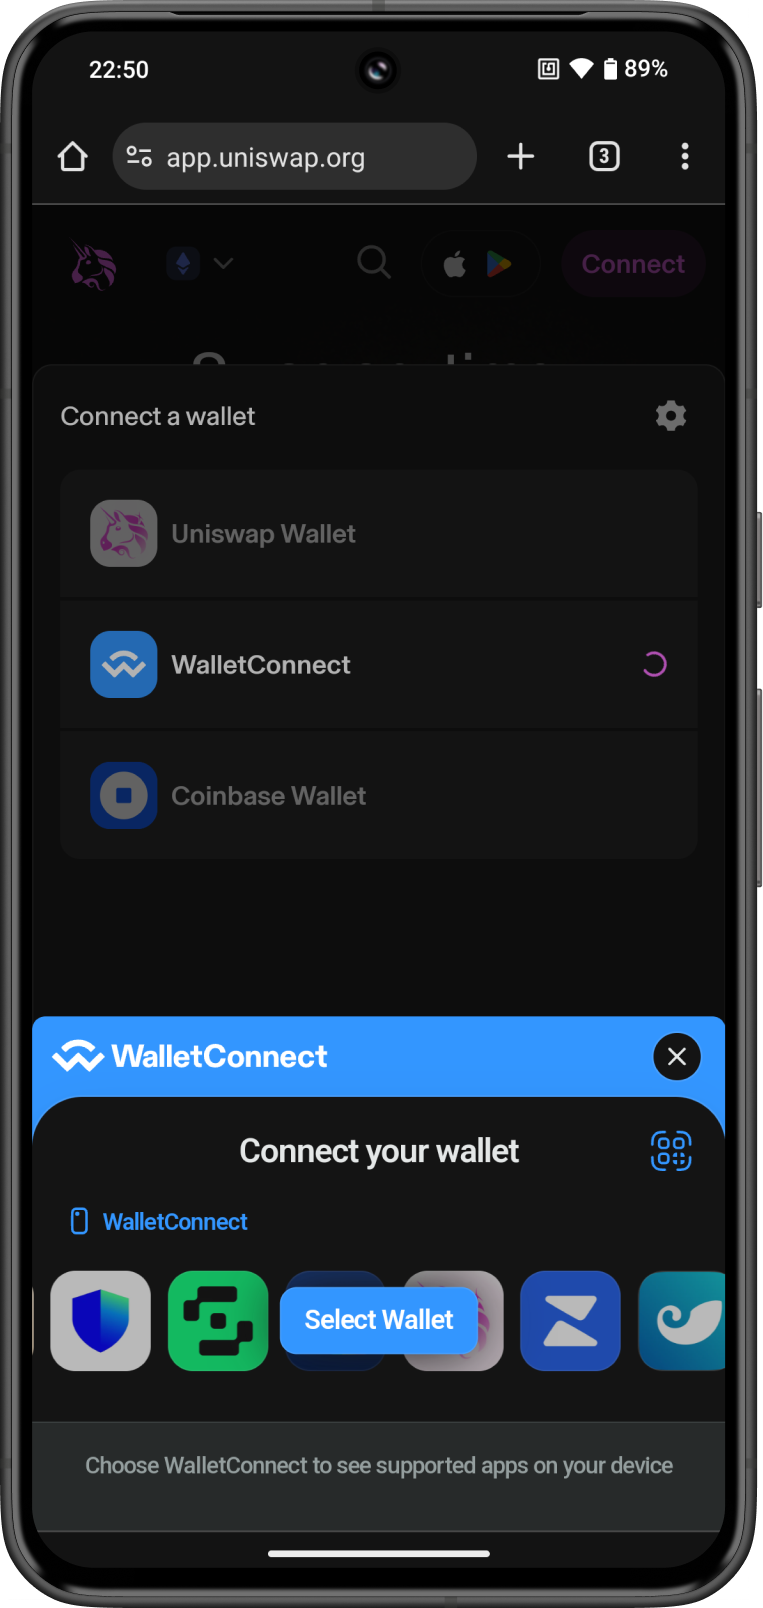 Connect a Wallet Screen